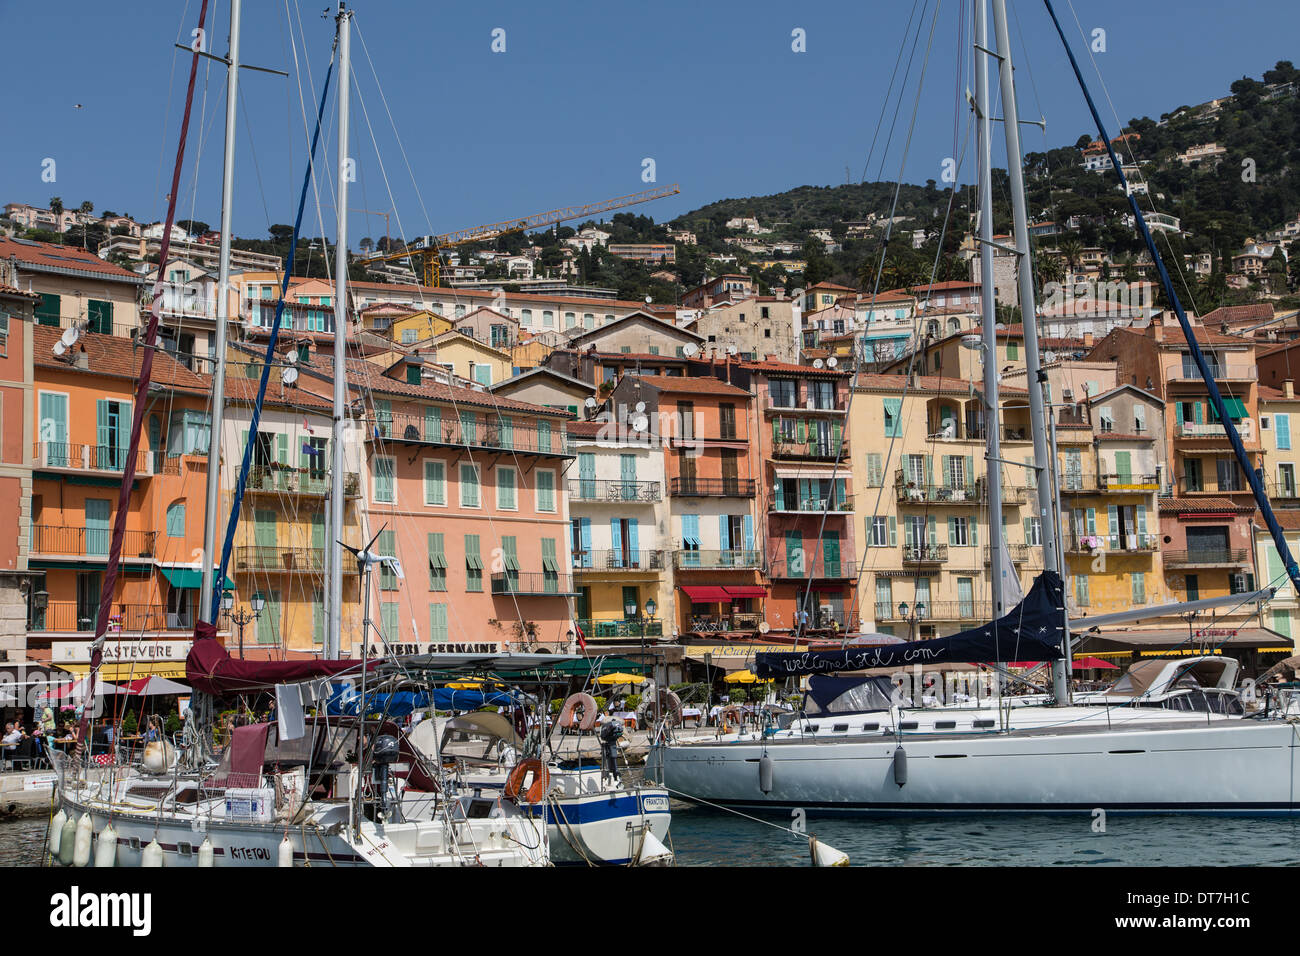 Boats in a harbor at Villefranche France in the Mediterranean Stock Photo